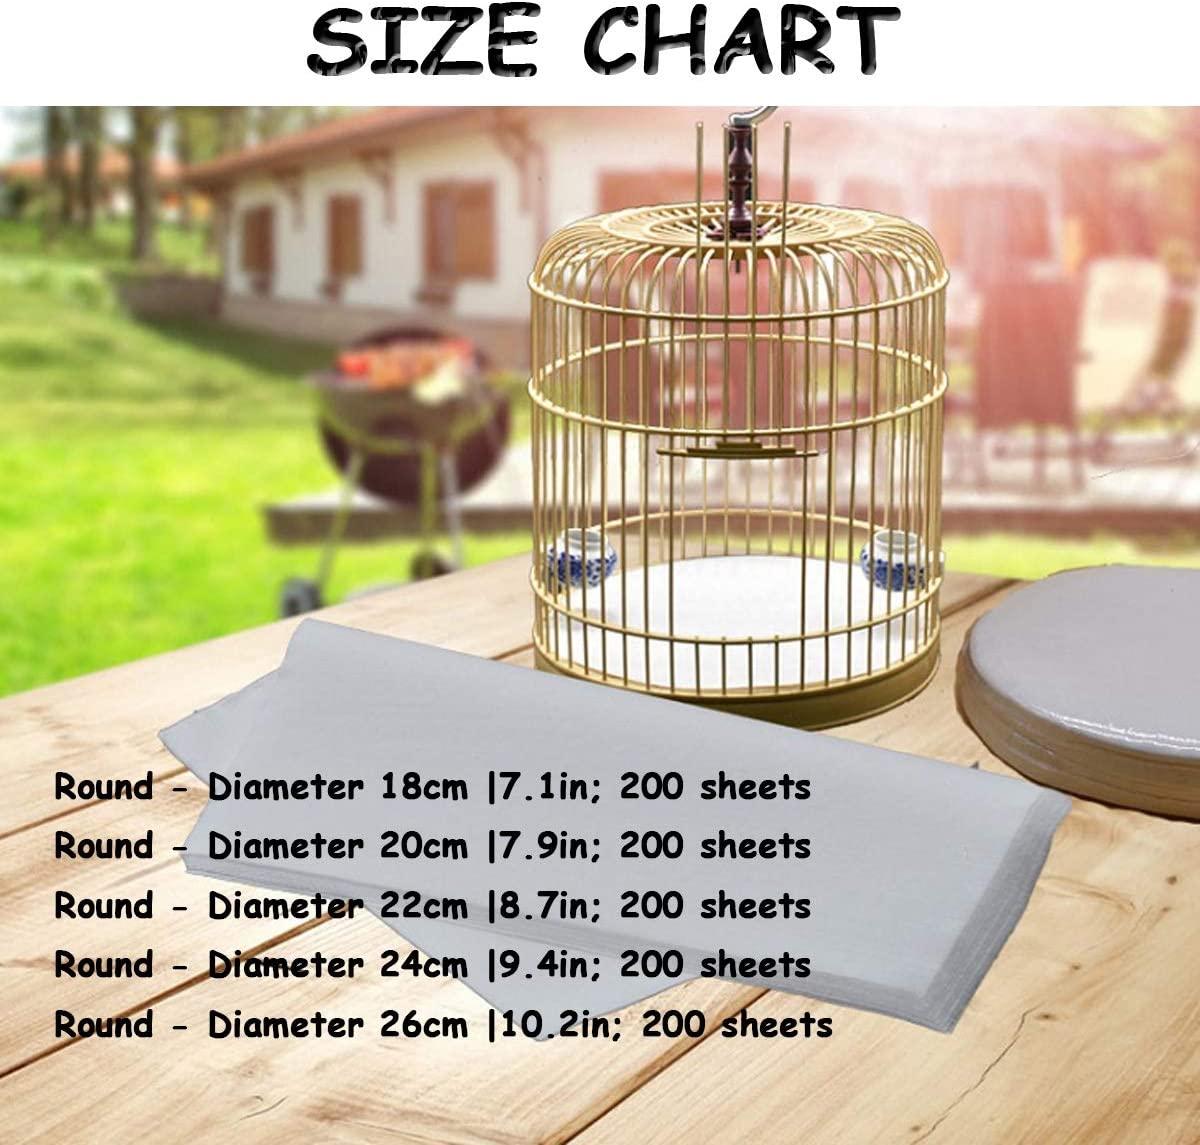 Bonaweite Bird Cage Liner Paper, Extra Large Size Pre Cut Sheets for  Birdcages, Precut Absorbent Disposable Non-Woven Cages Cushion Pad Mat